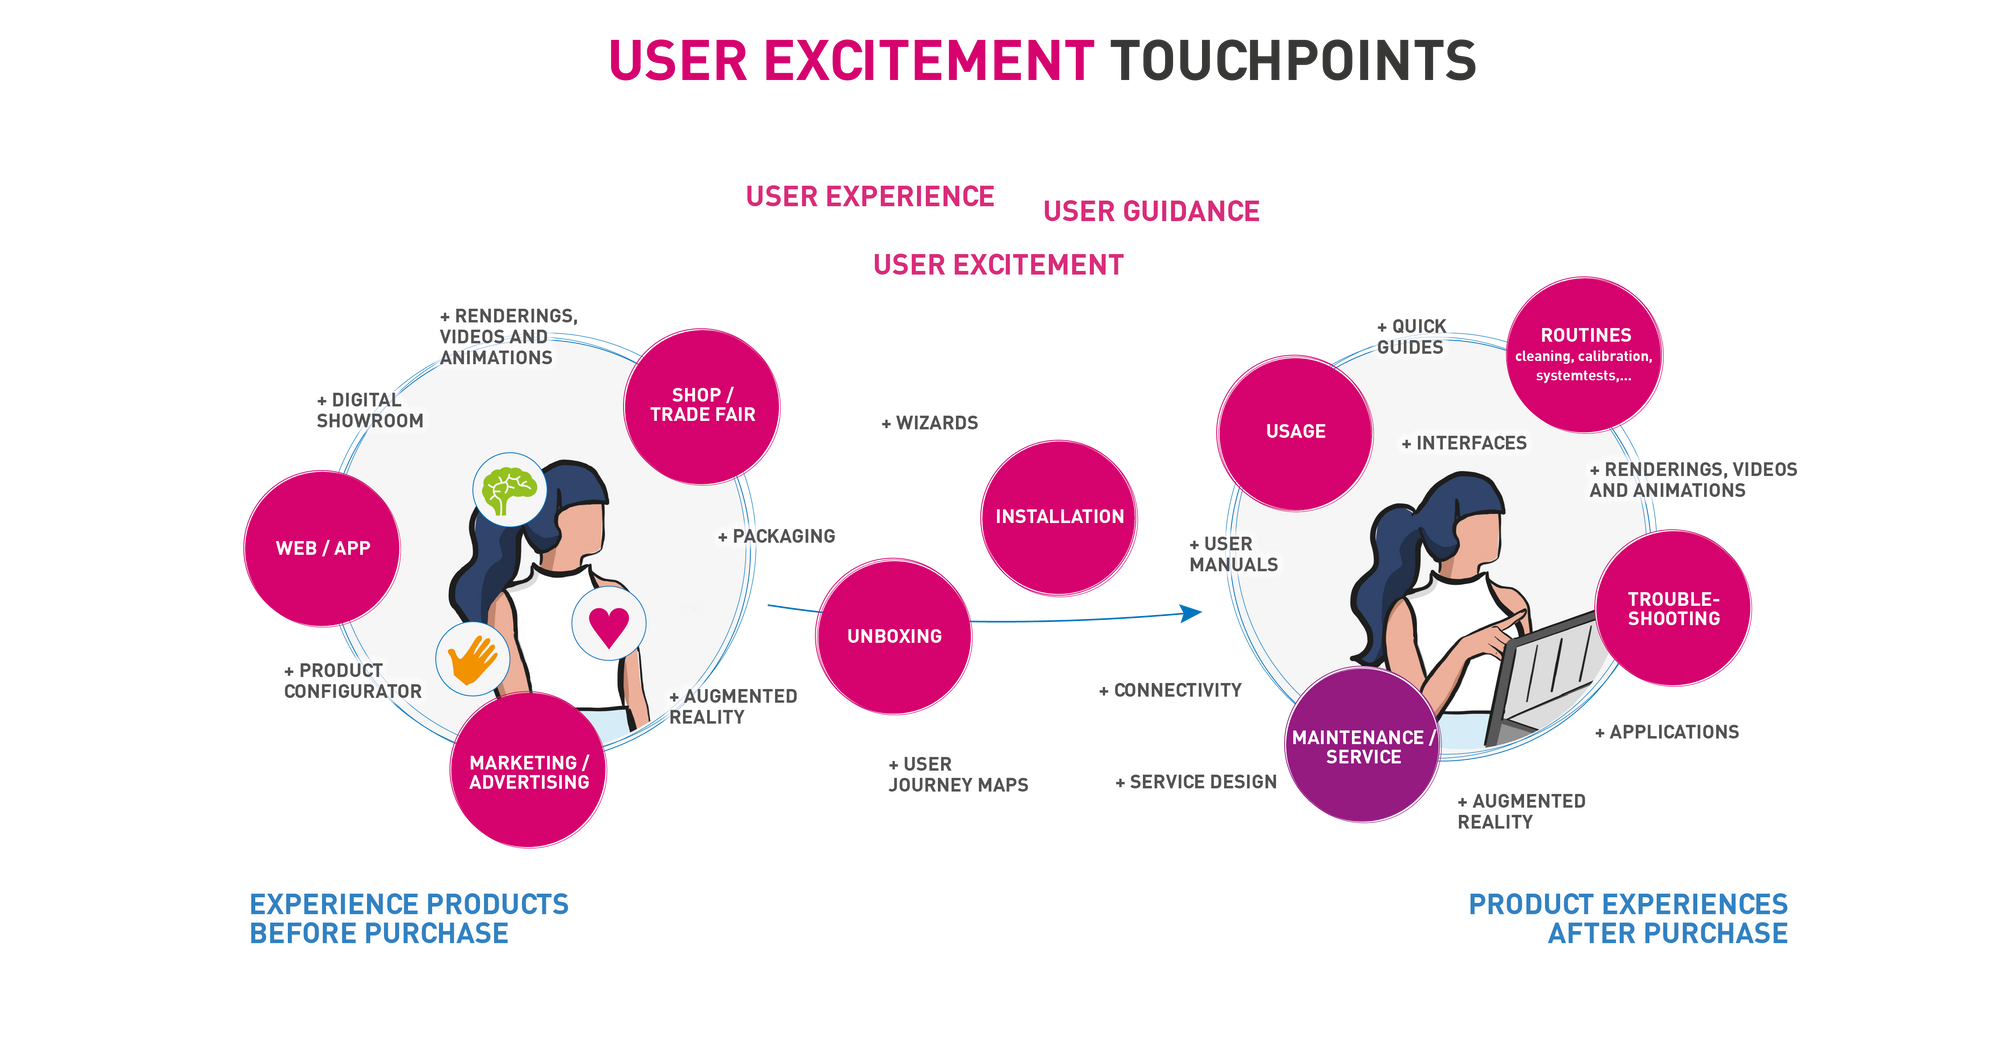 User Excitement Touchpoints